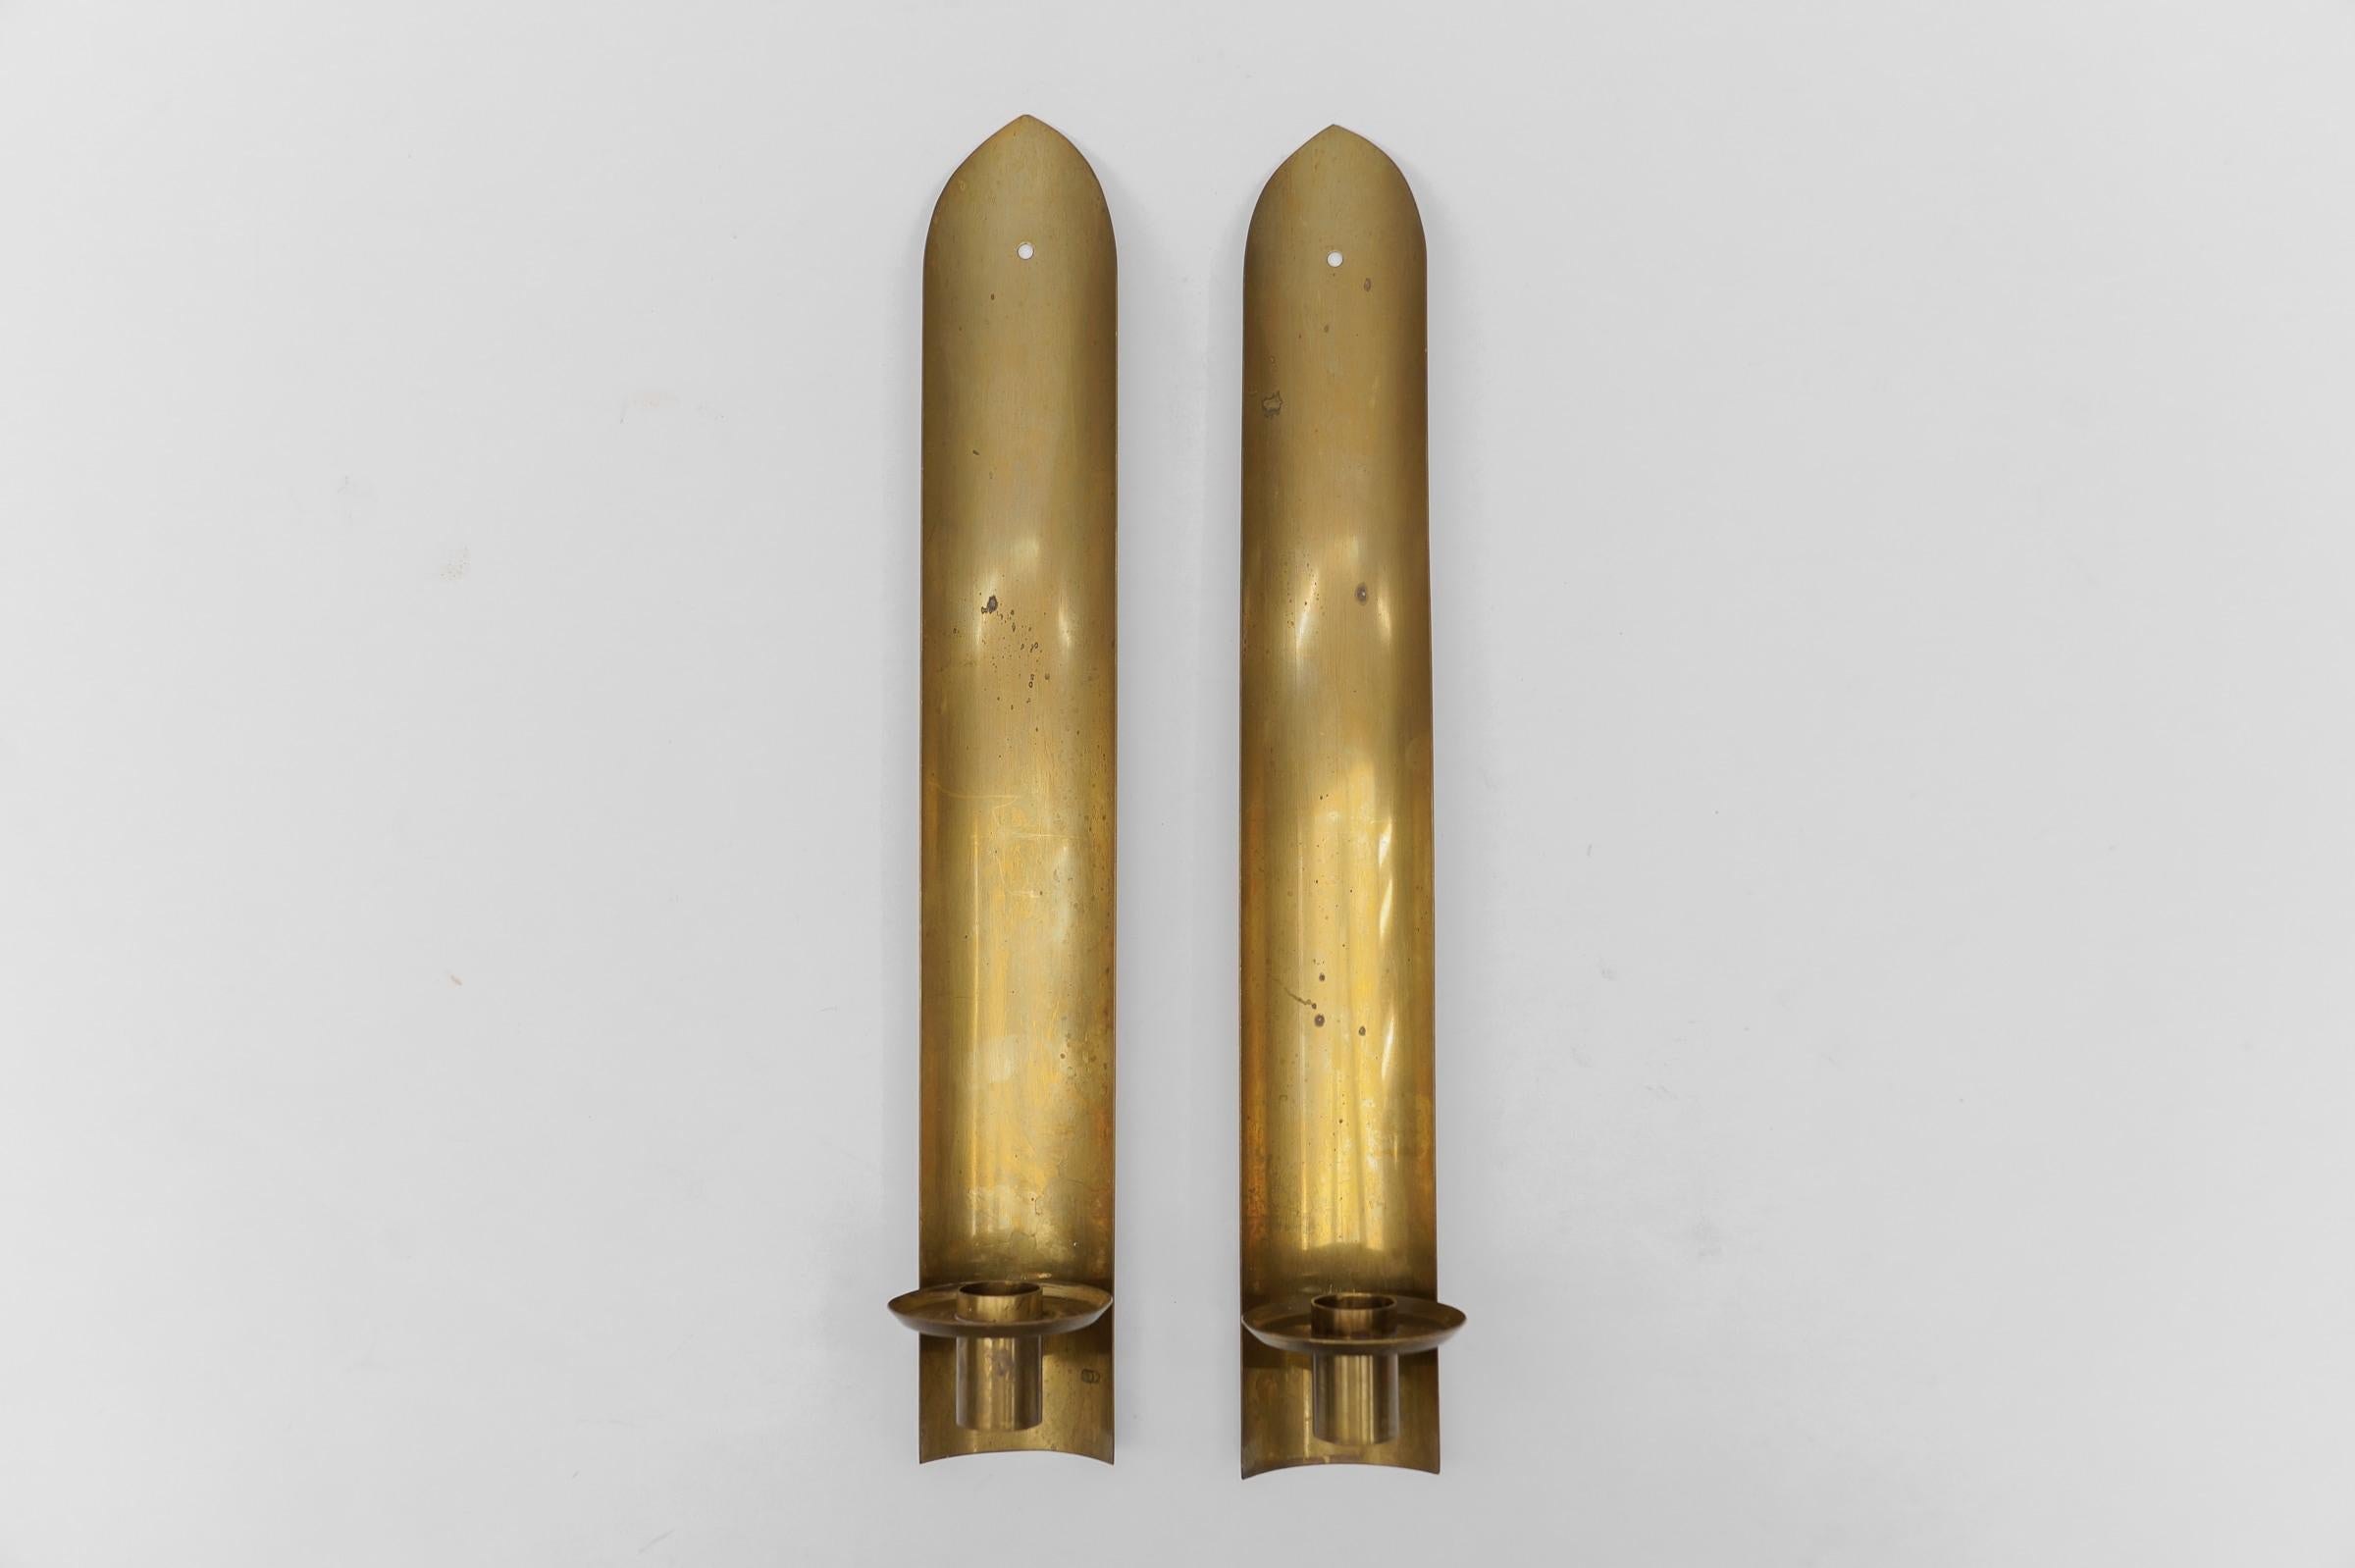 Awesome Pair of Brass Wall Candle Holder, 1950s Austria
